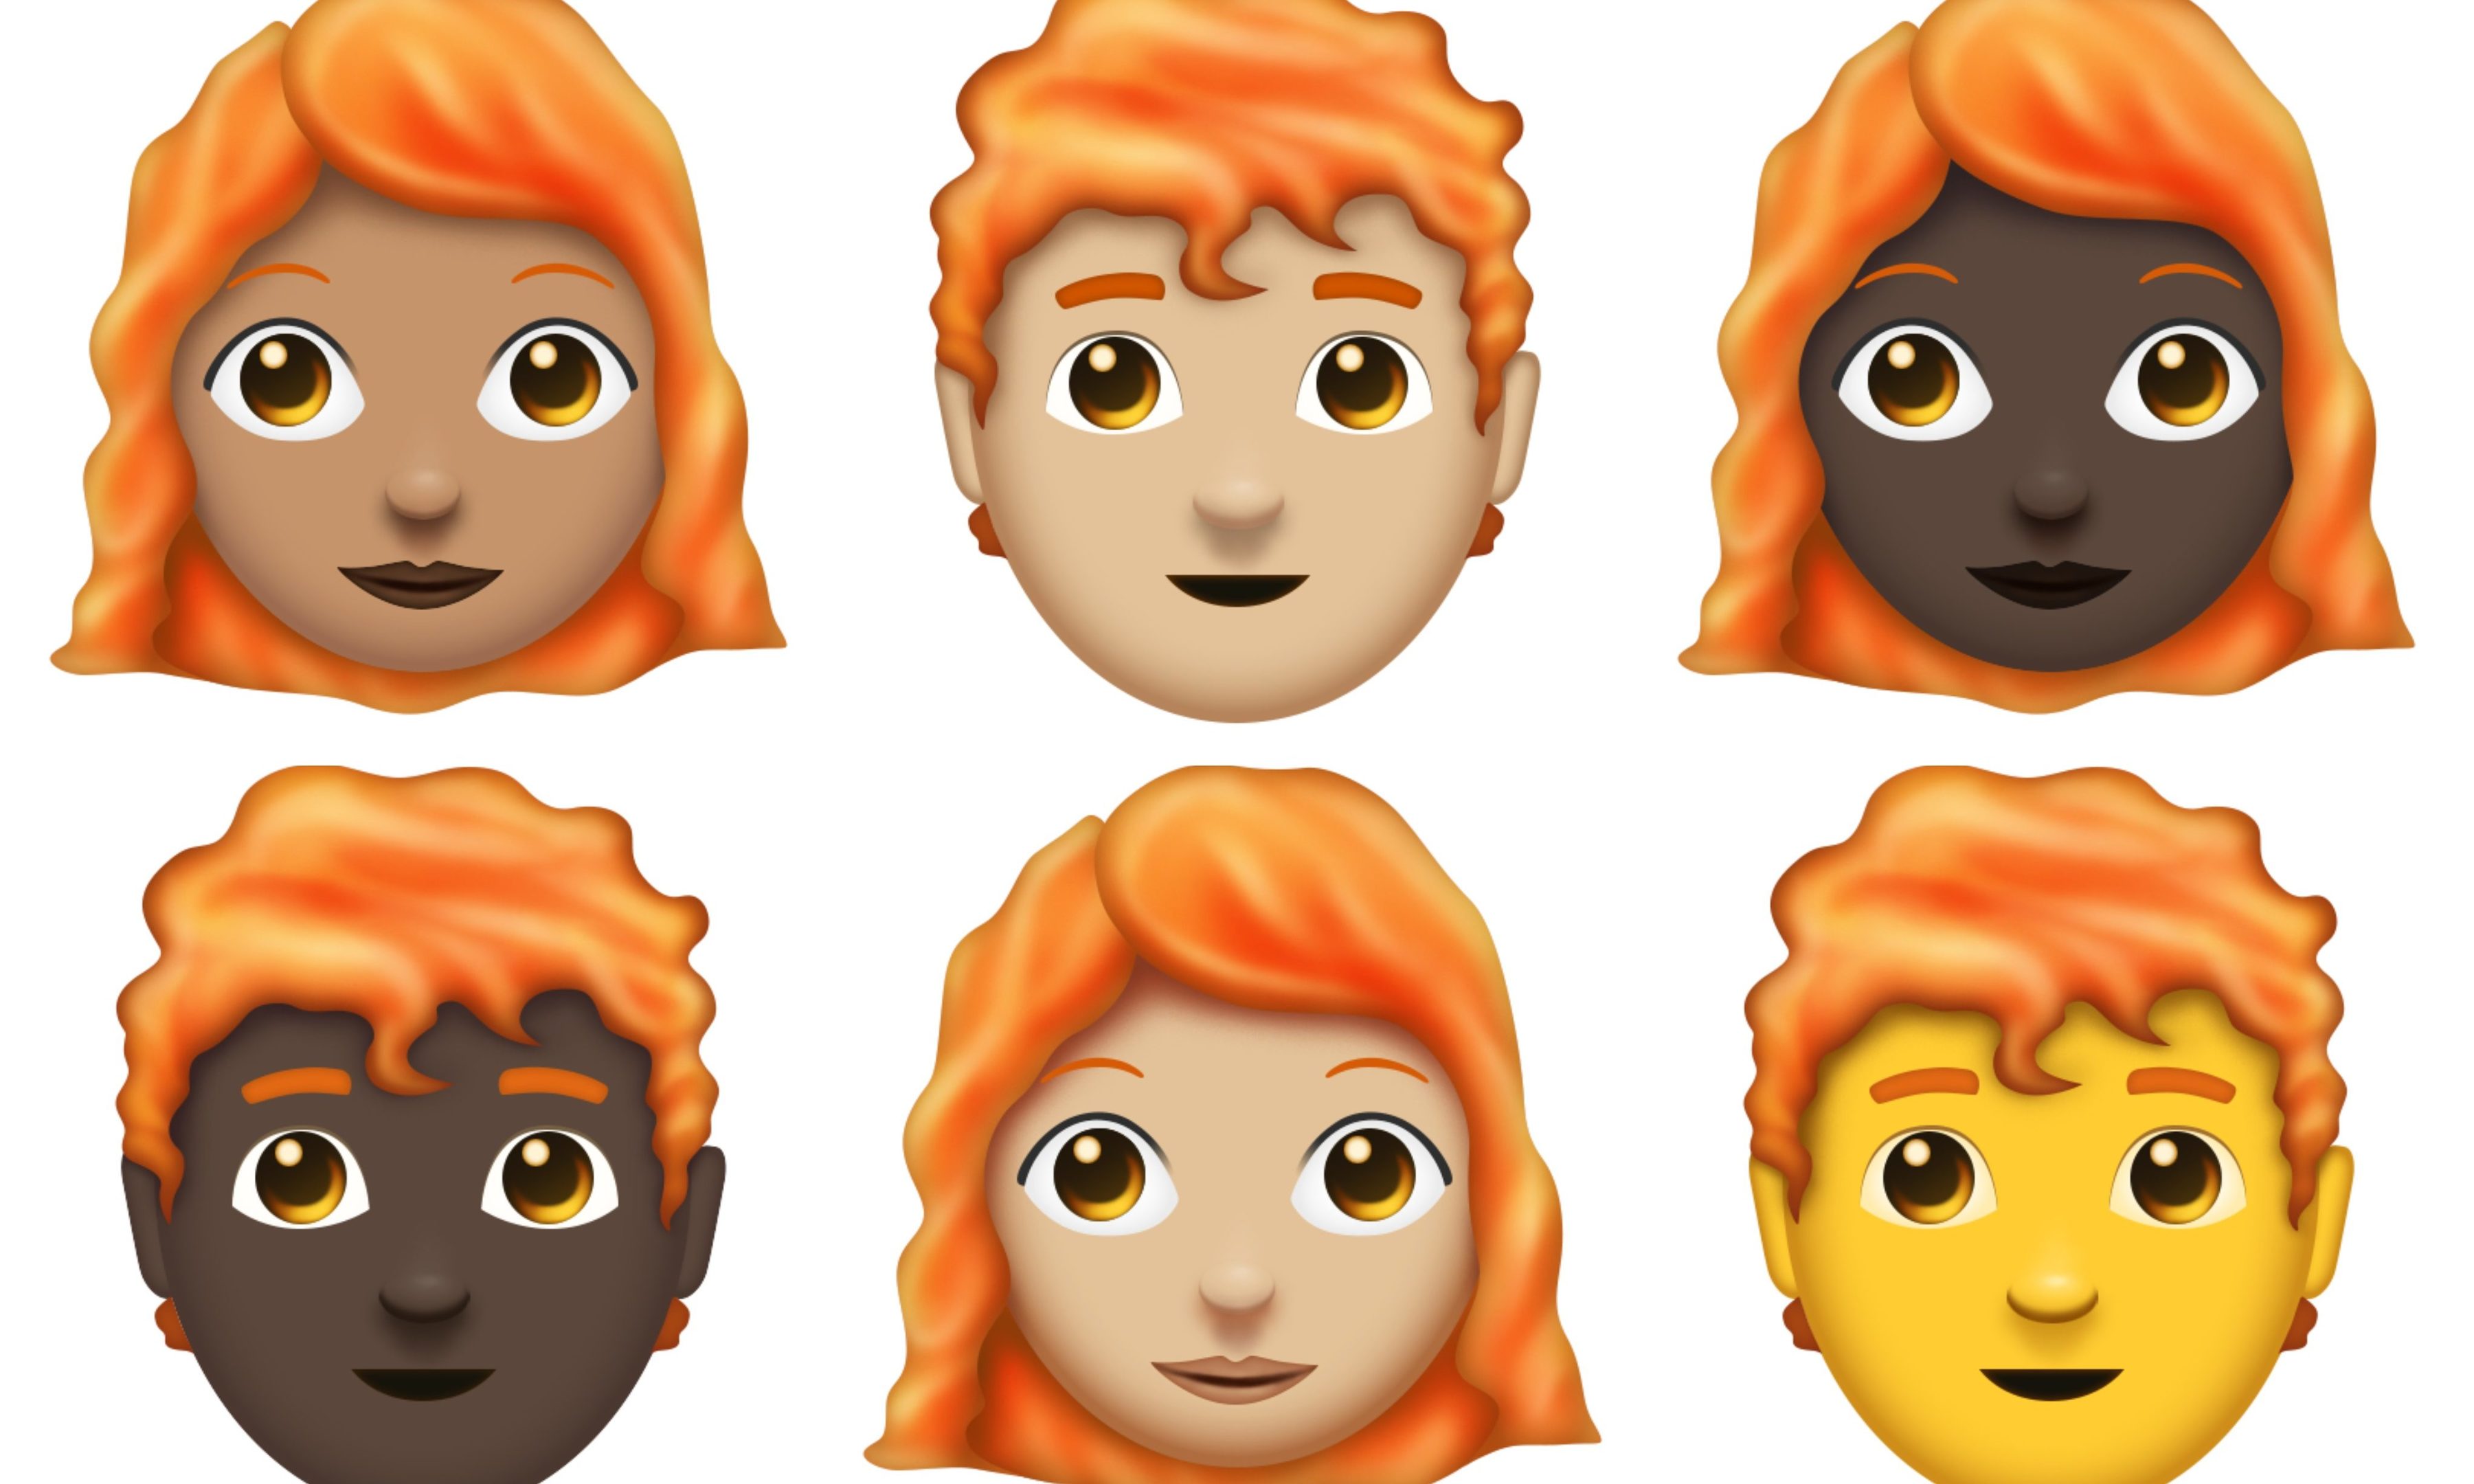 The new ginger emojis